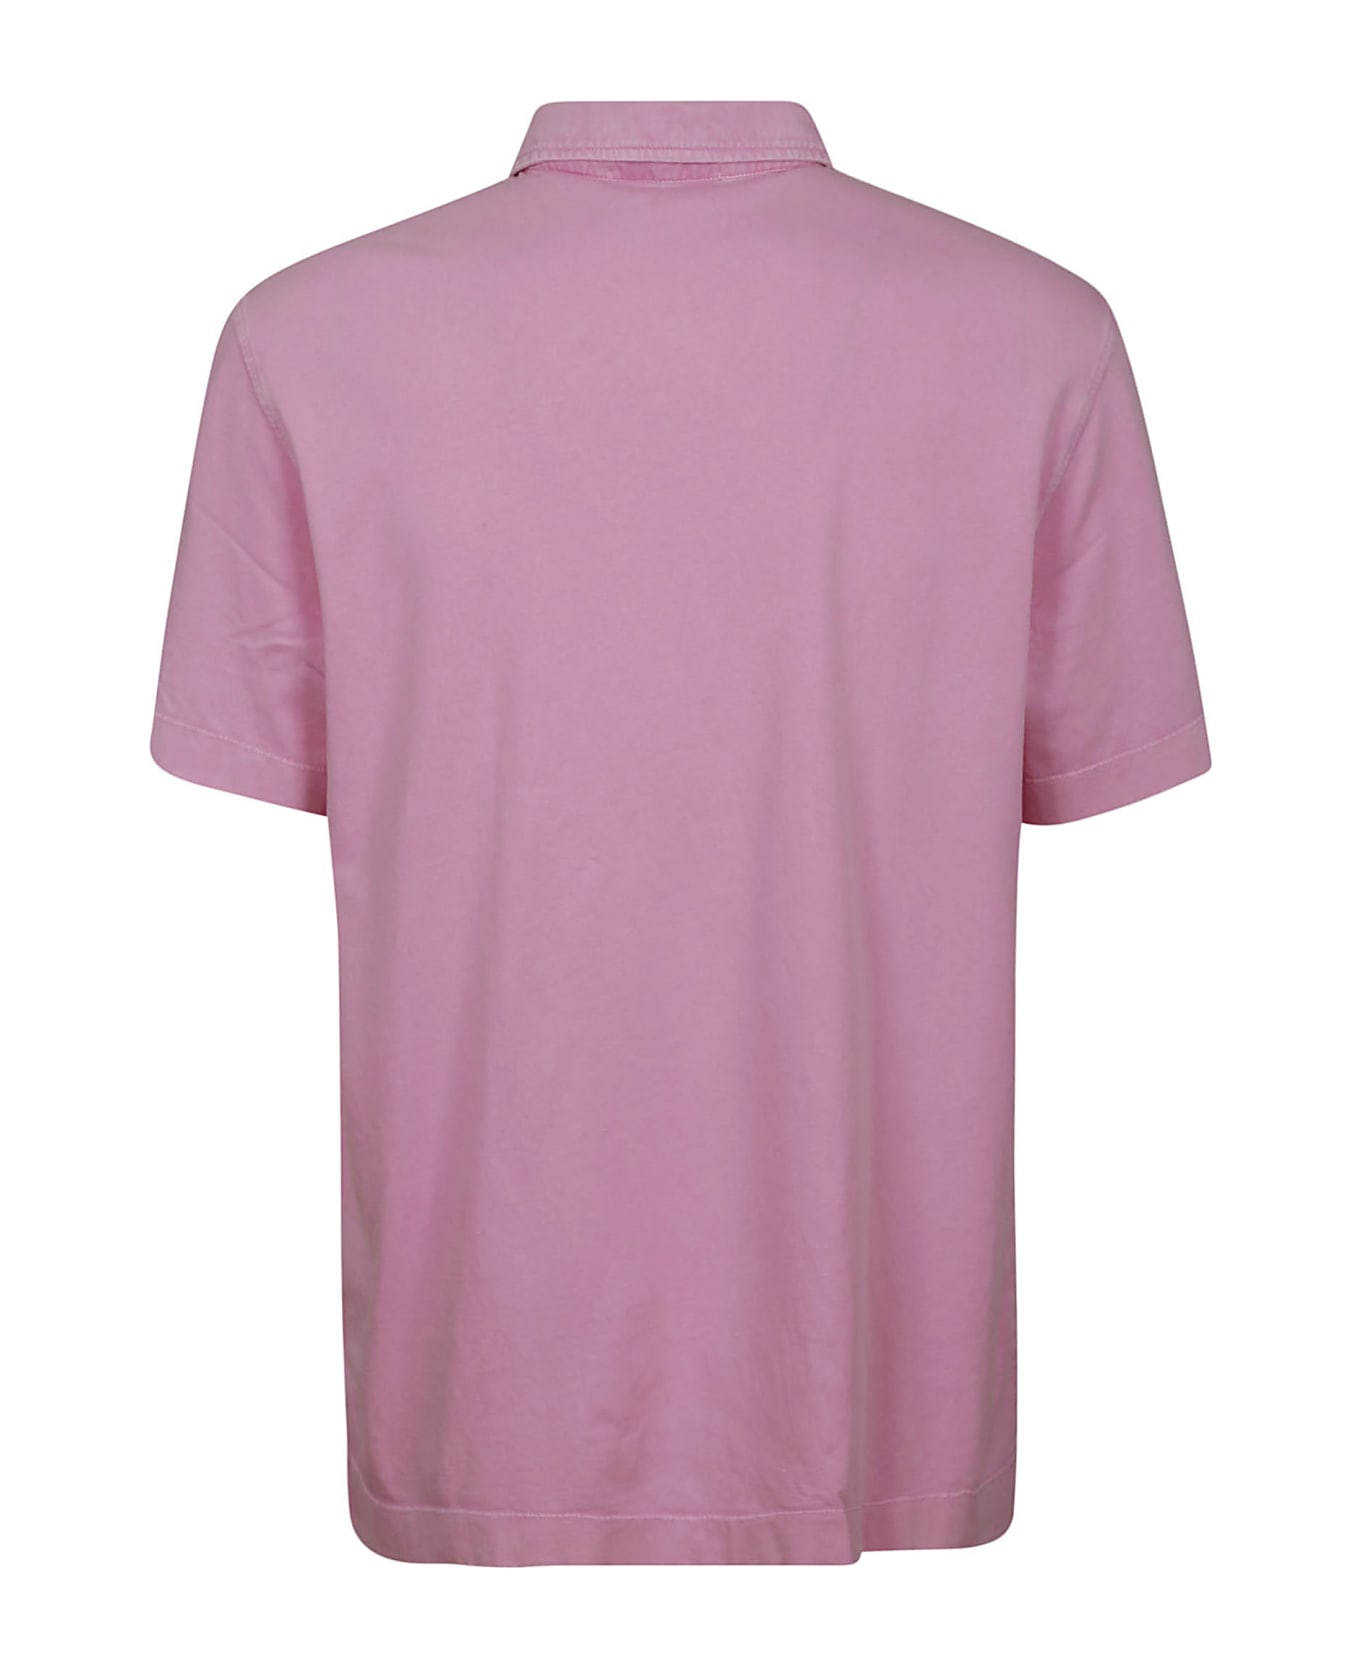 Drumohr Polo S/s - Pink ポロシャツ